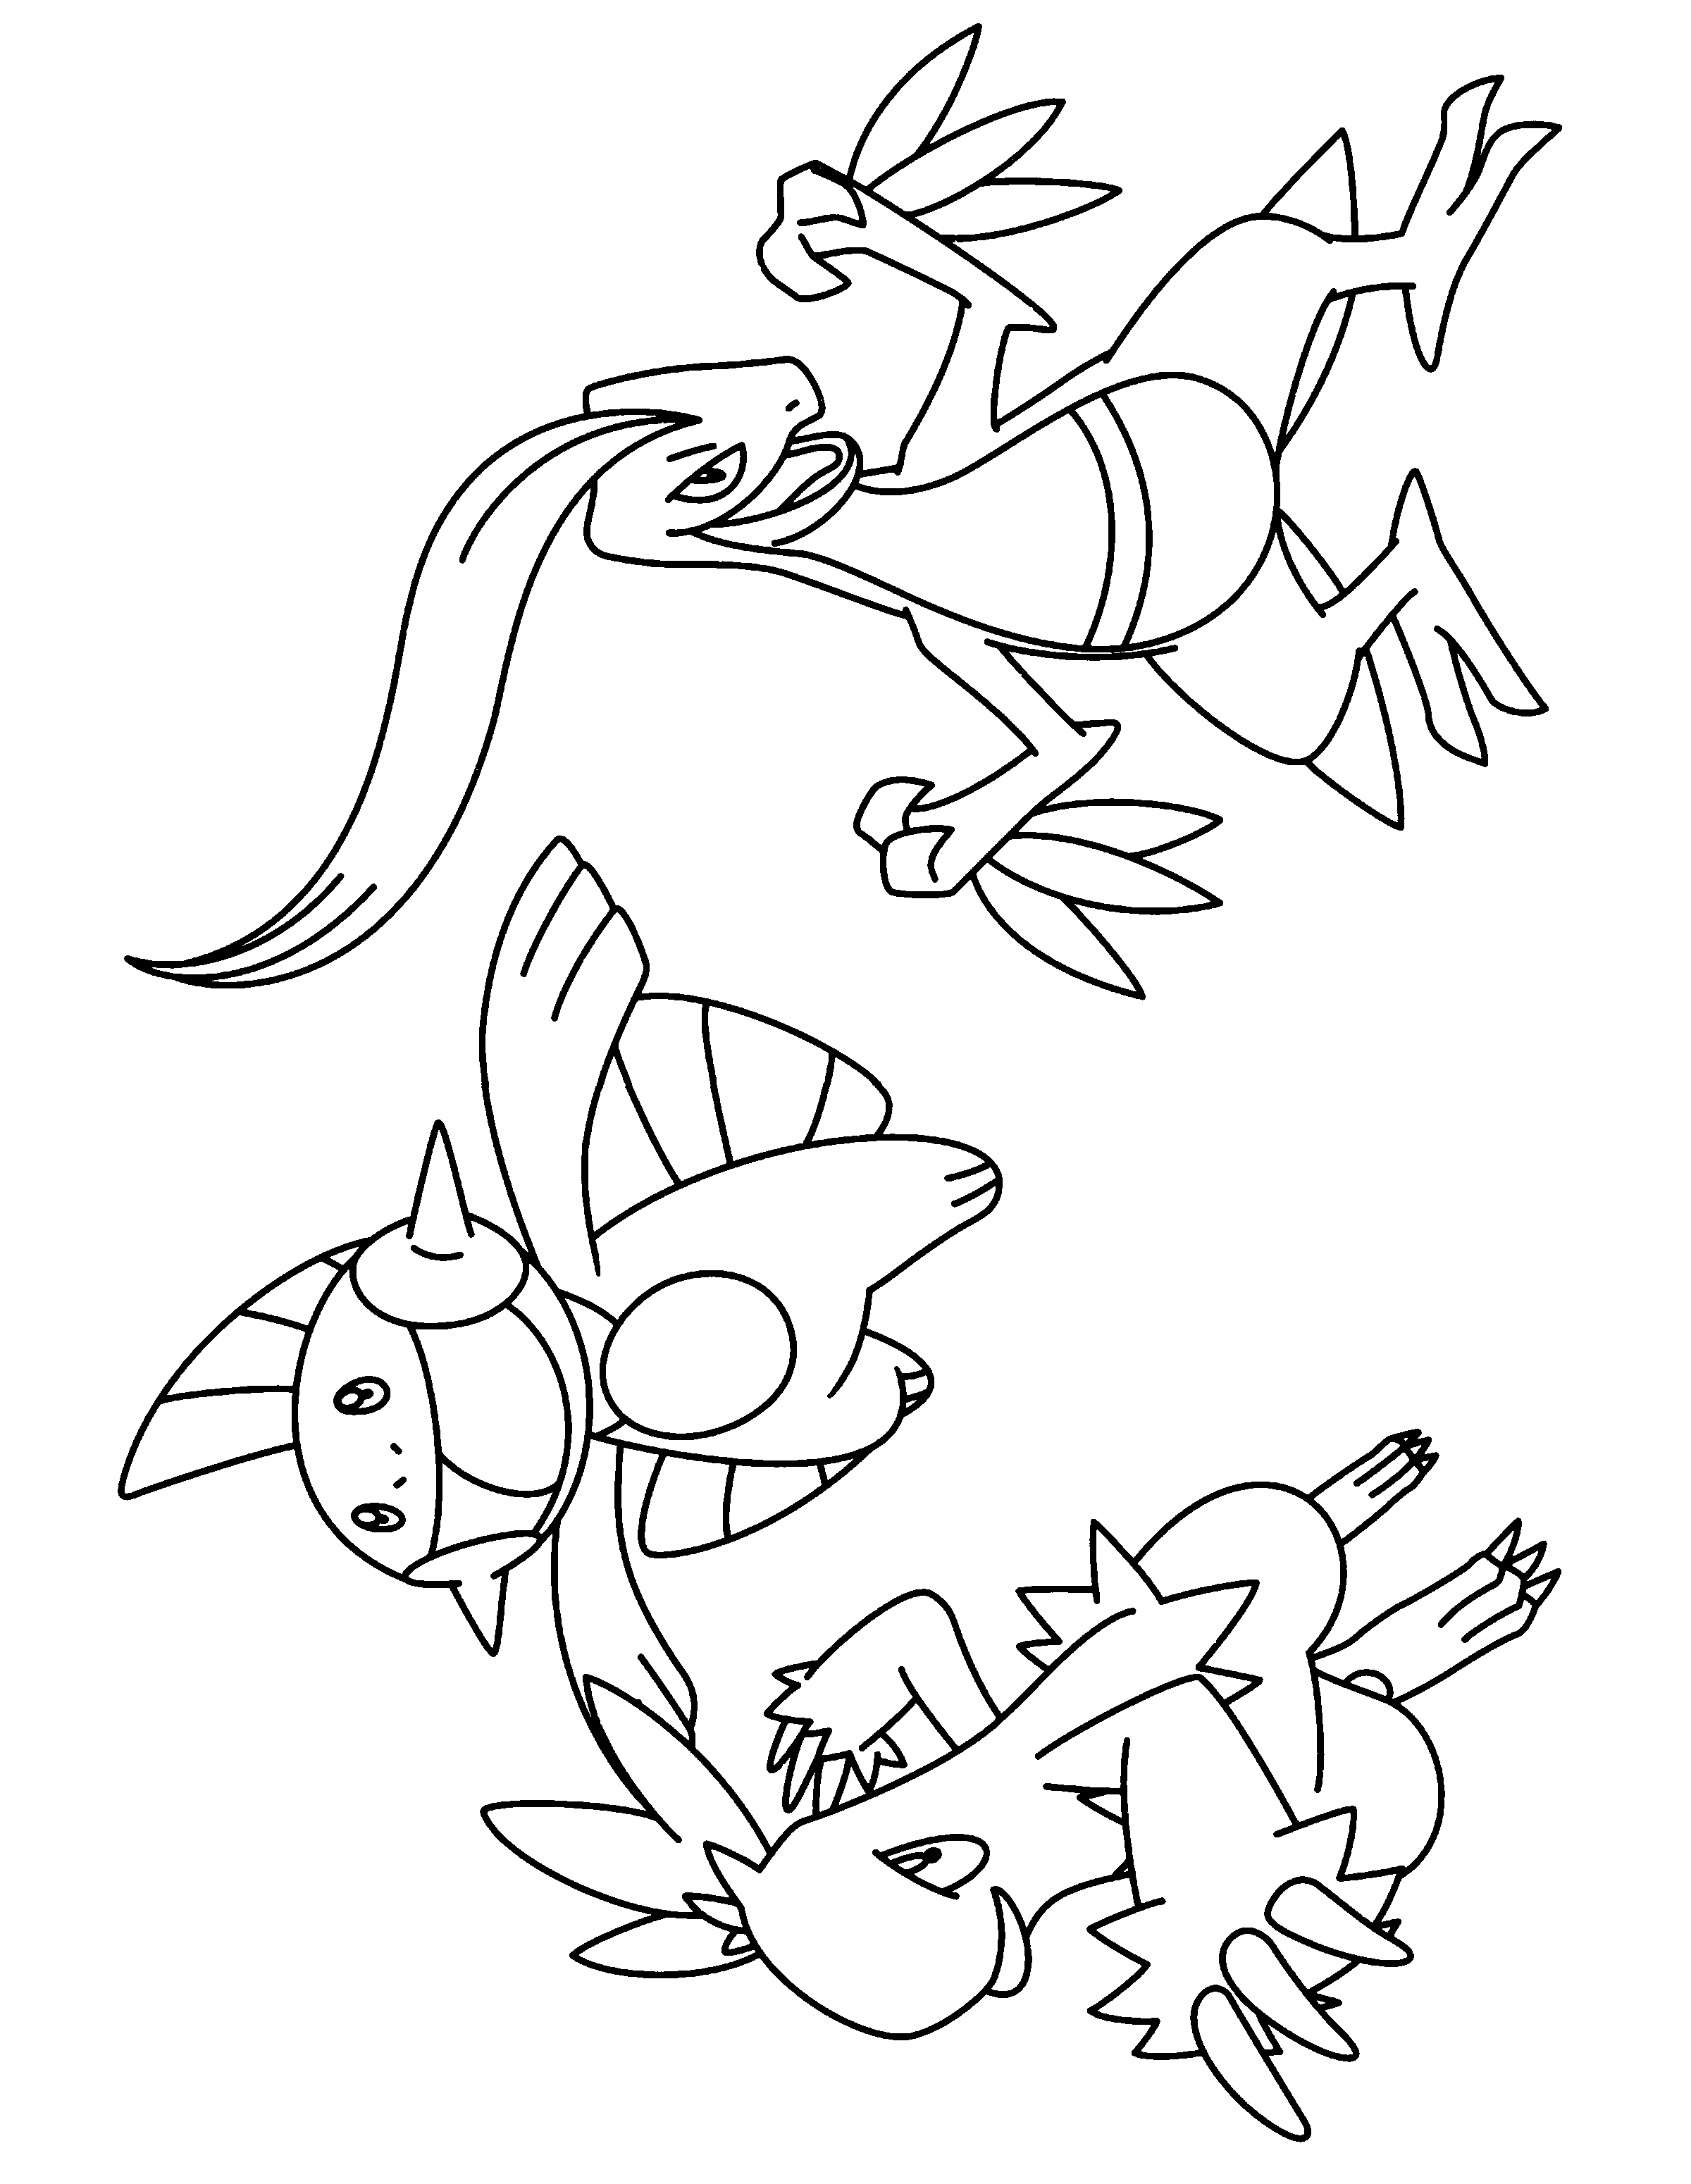 animated-coloring-pages-pokemon-image-0904